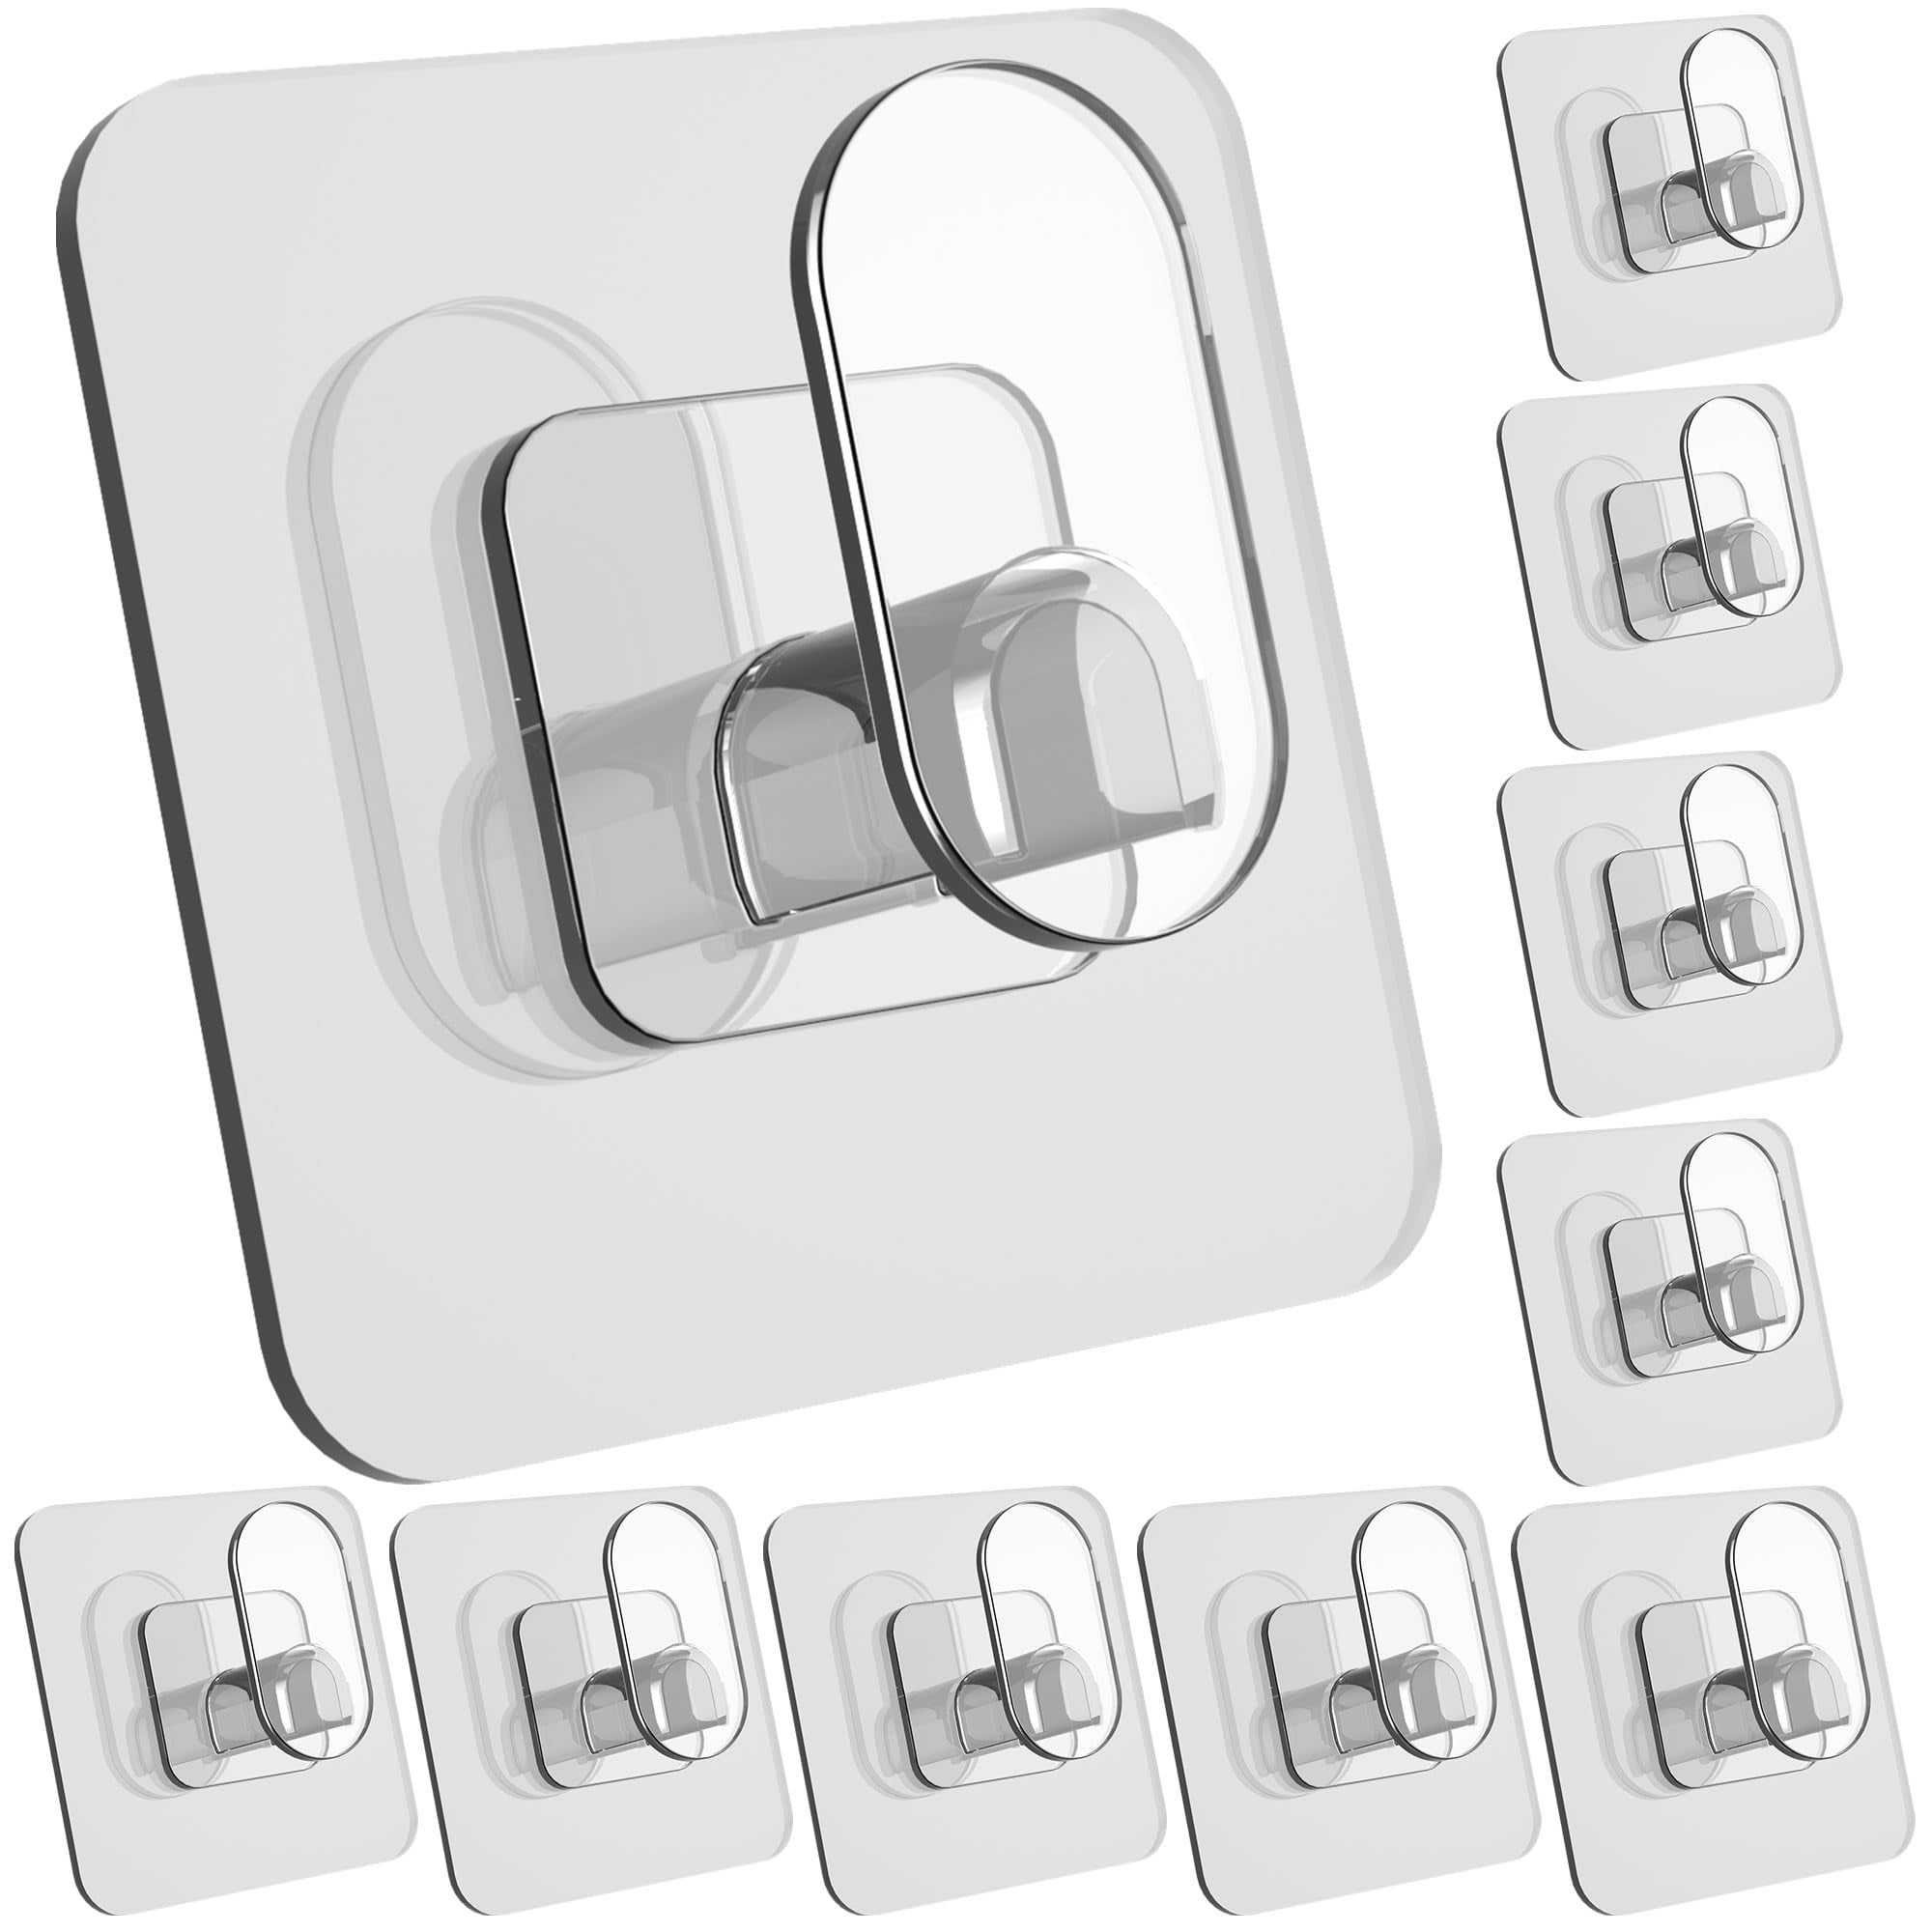 Iopqo Command Hook Adhesive Hooks Heavy Duty Wall Hooks for Hanging Wall Hangers Without Nails 2 in 1 Screw Sticker for Wall Mount Shelf Waterproof